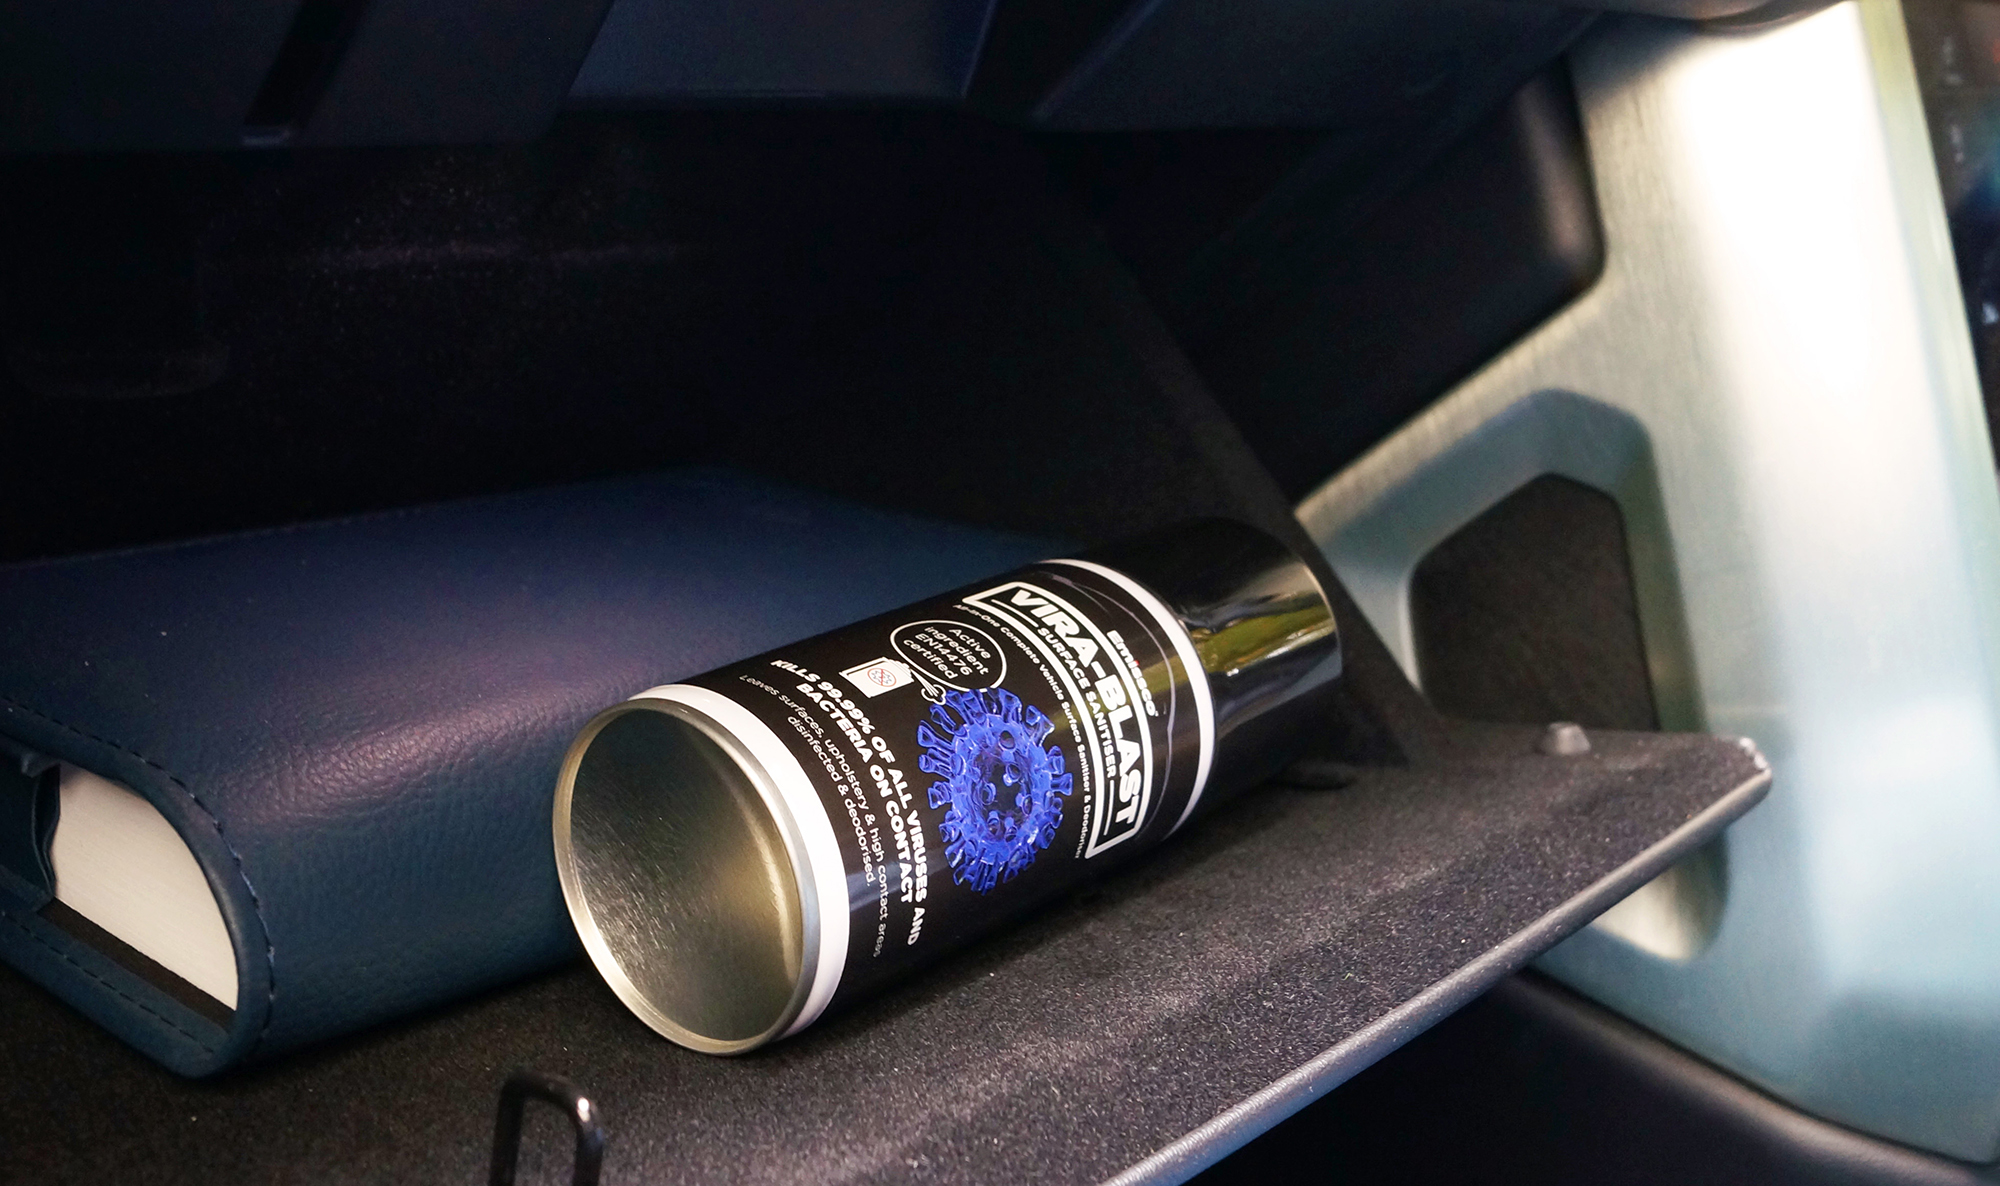 VIRA-BLAAAST car interior sanitiser products from Emissco help to combat viruses, while eliminating bacteria, fungi, mould and odours.